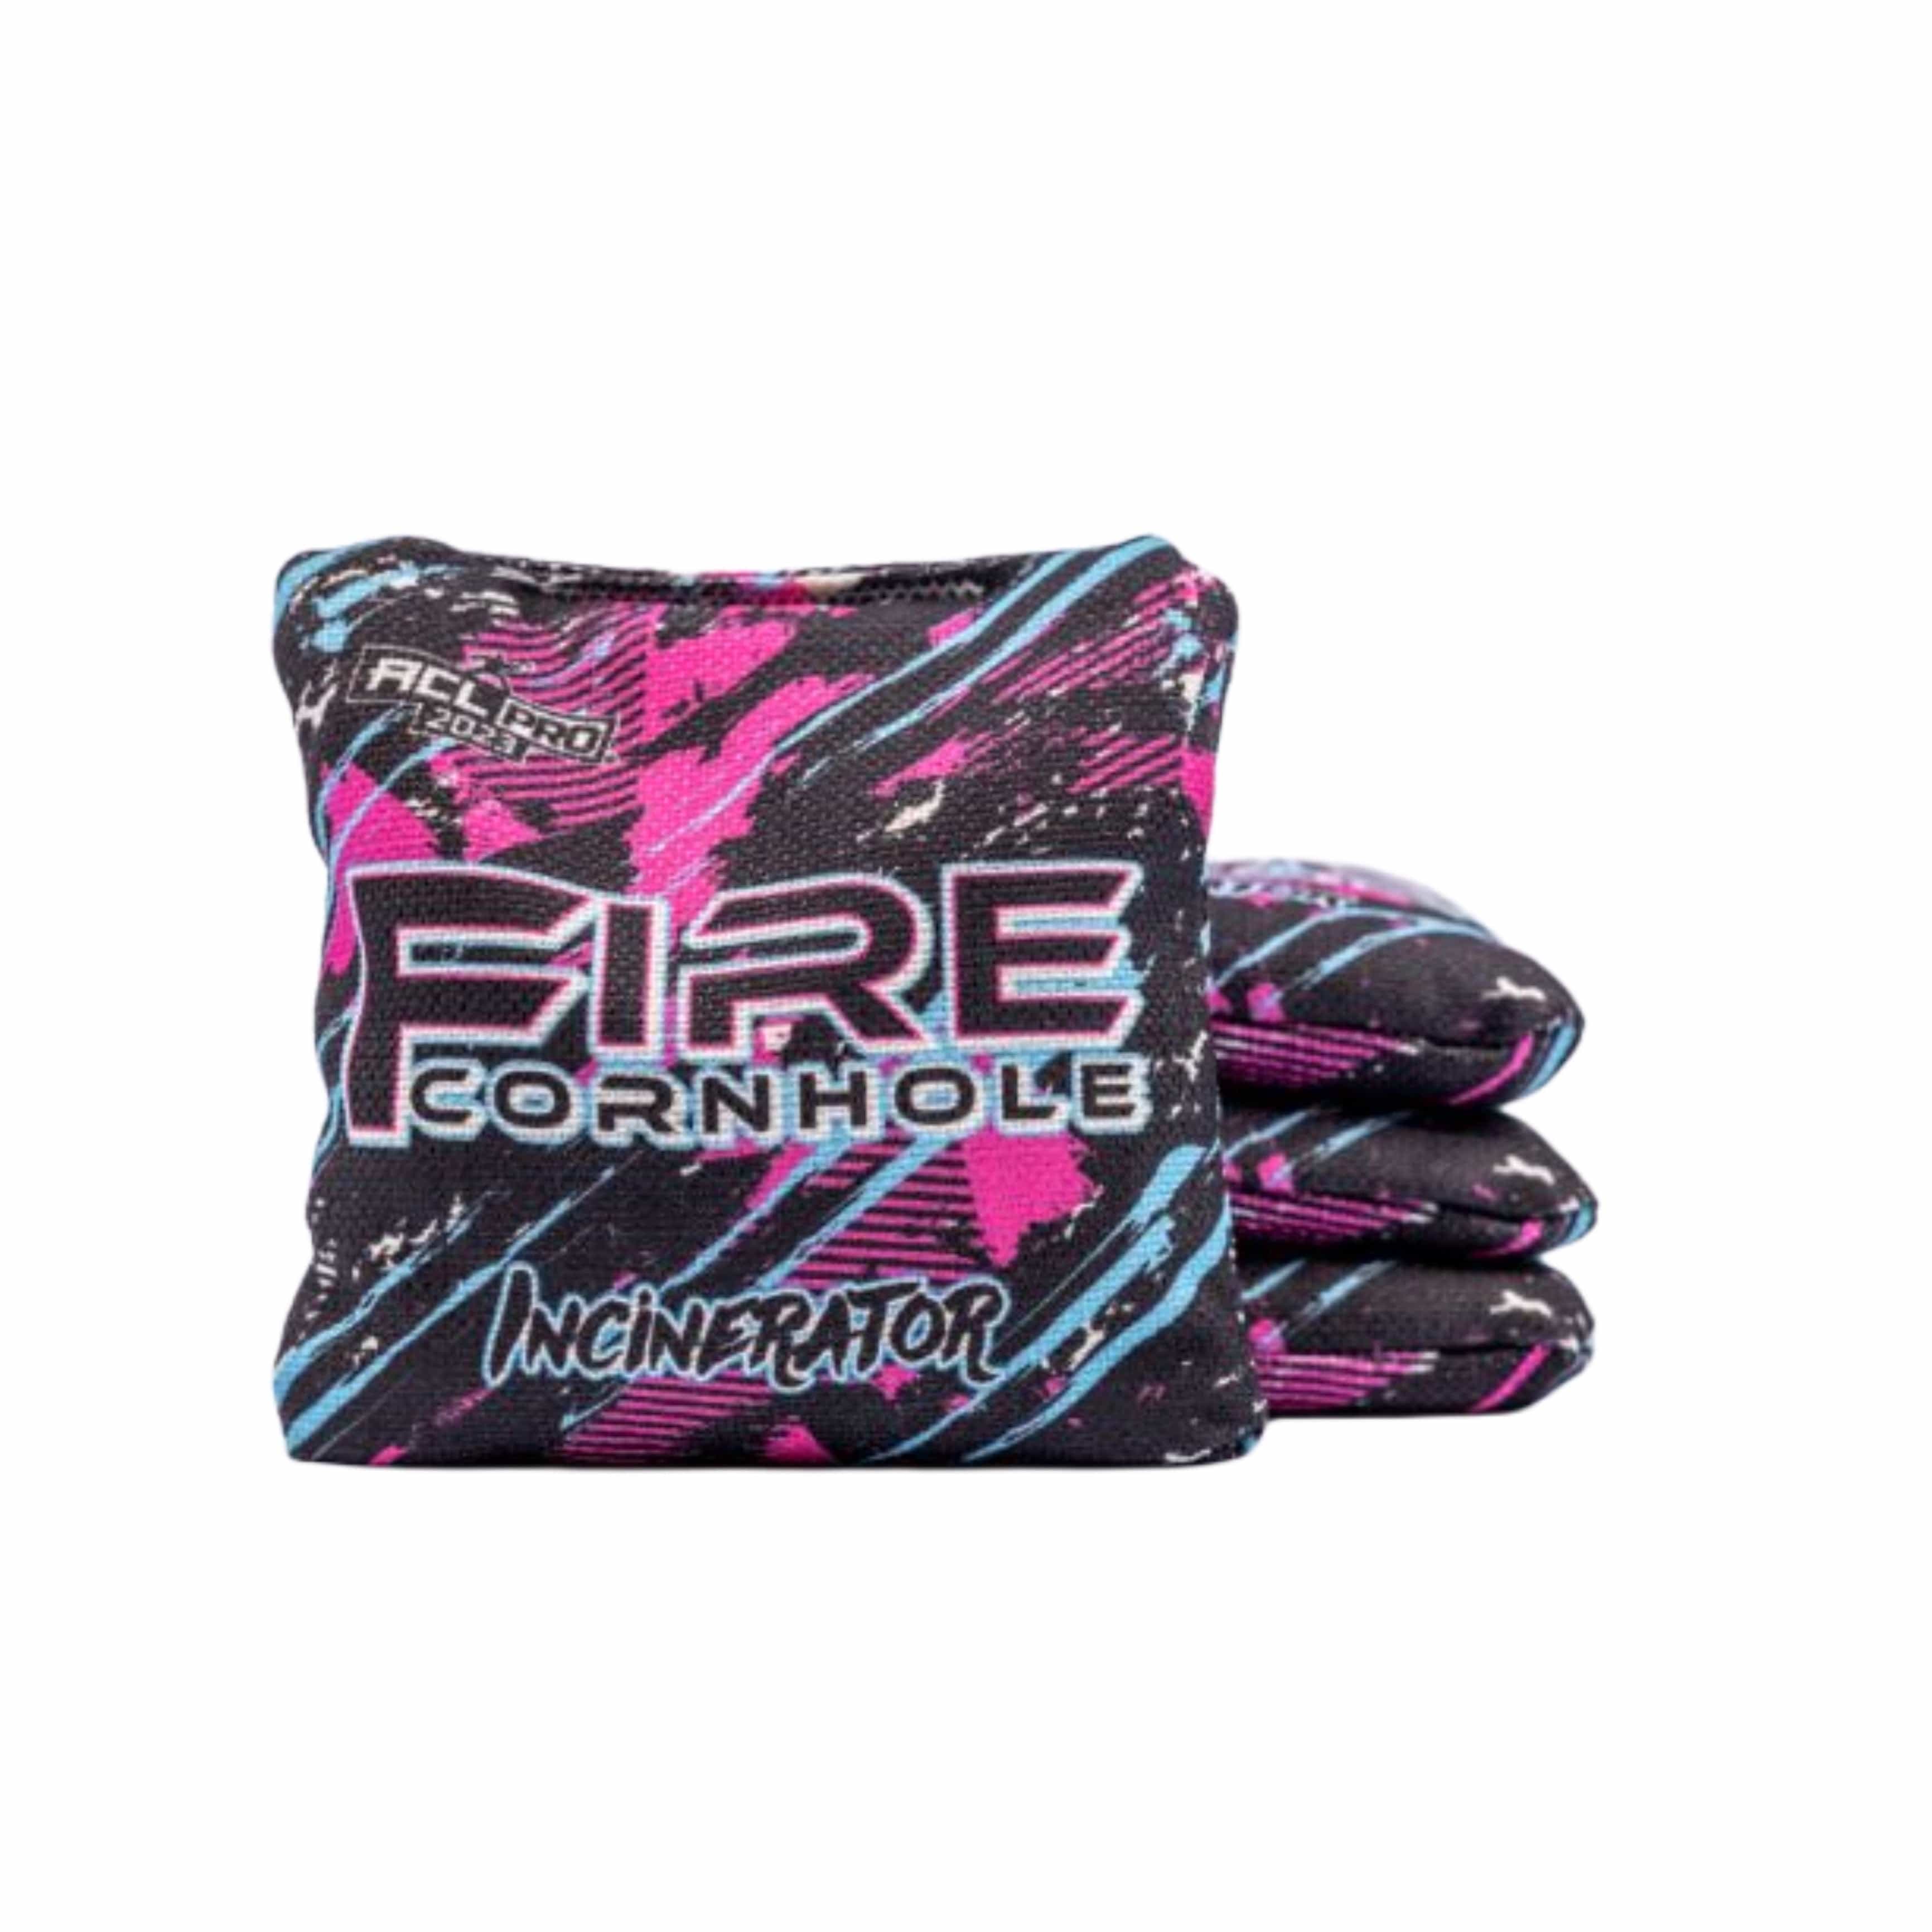 Fire Incinerator ACL cornhole bags in pink